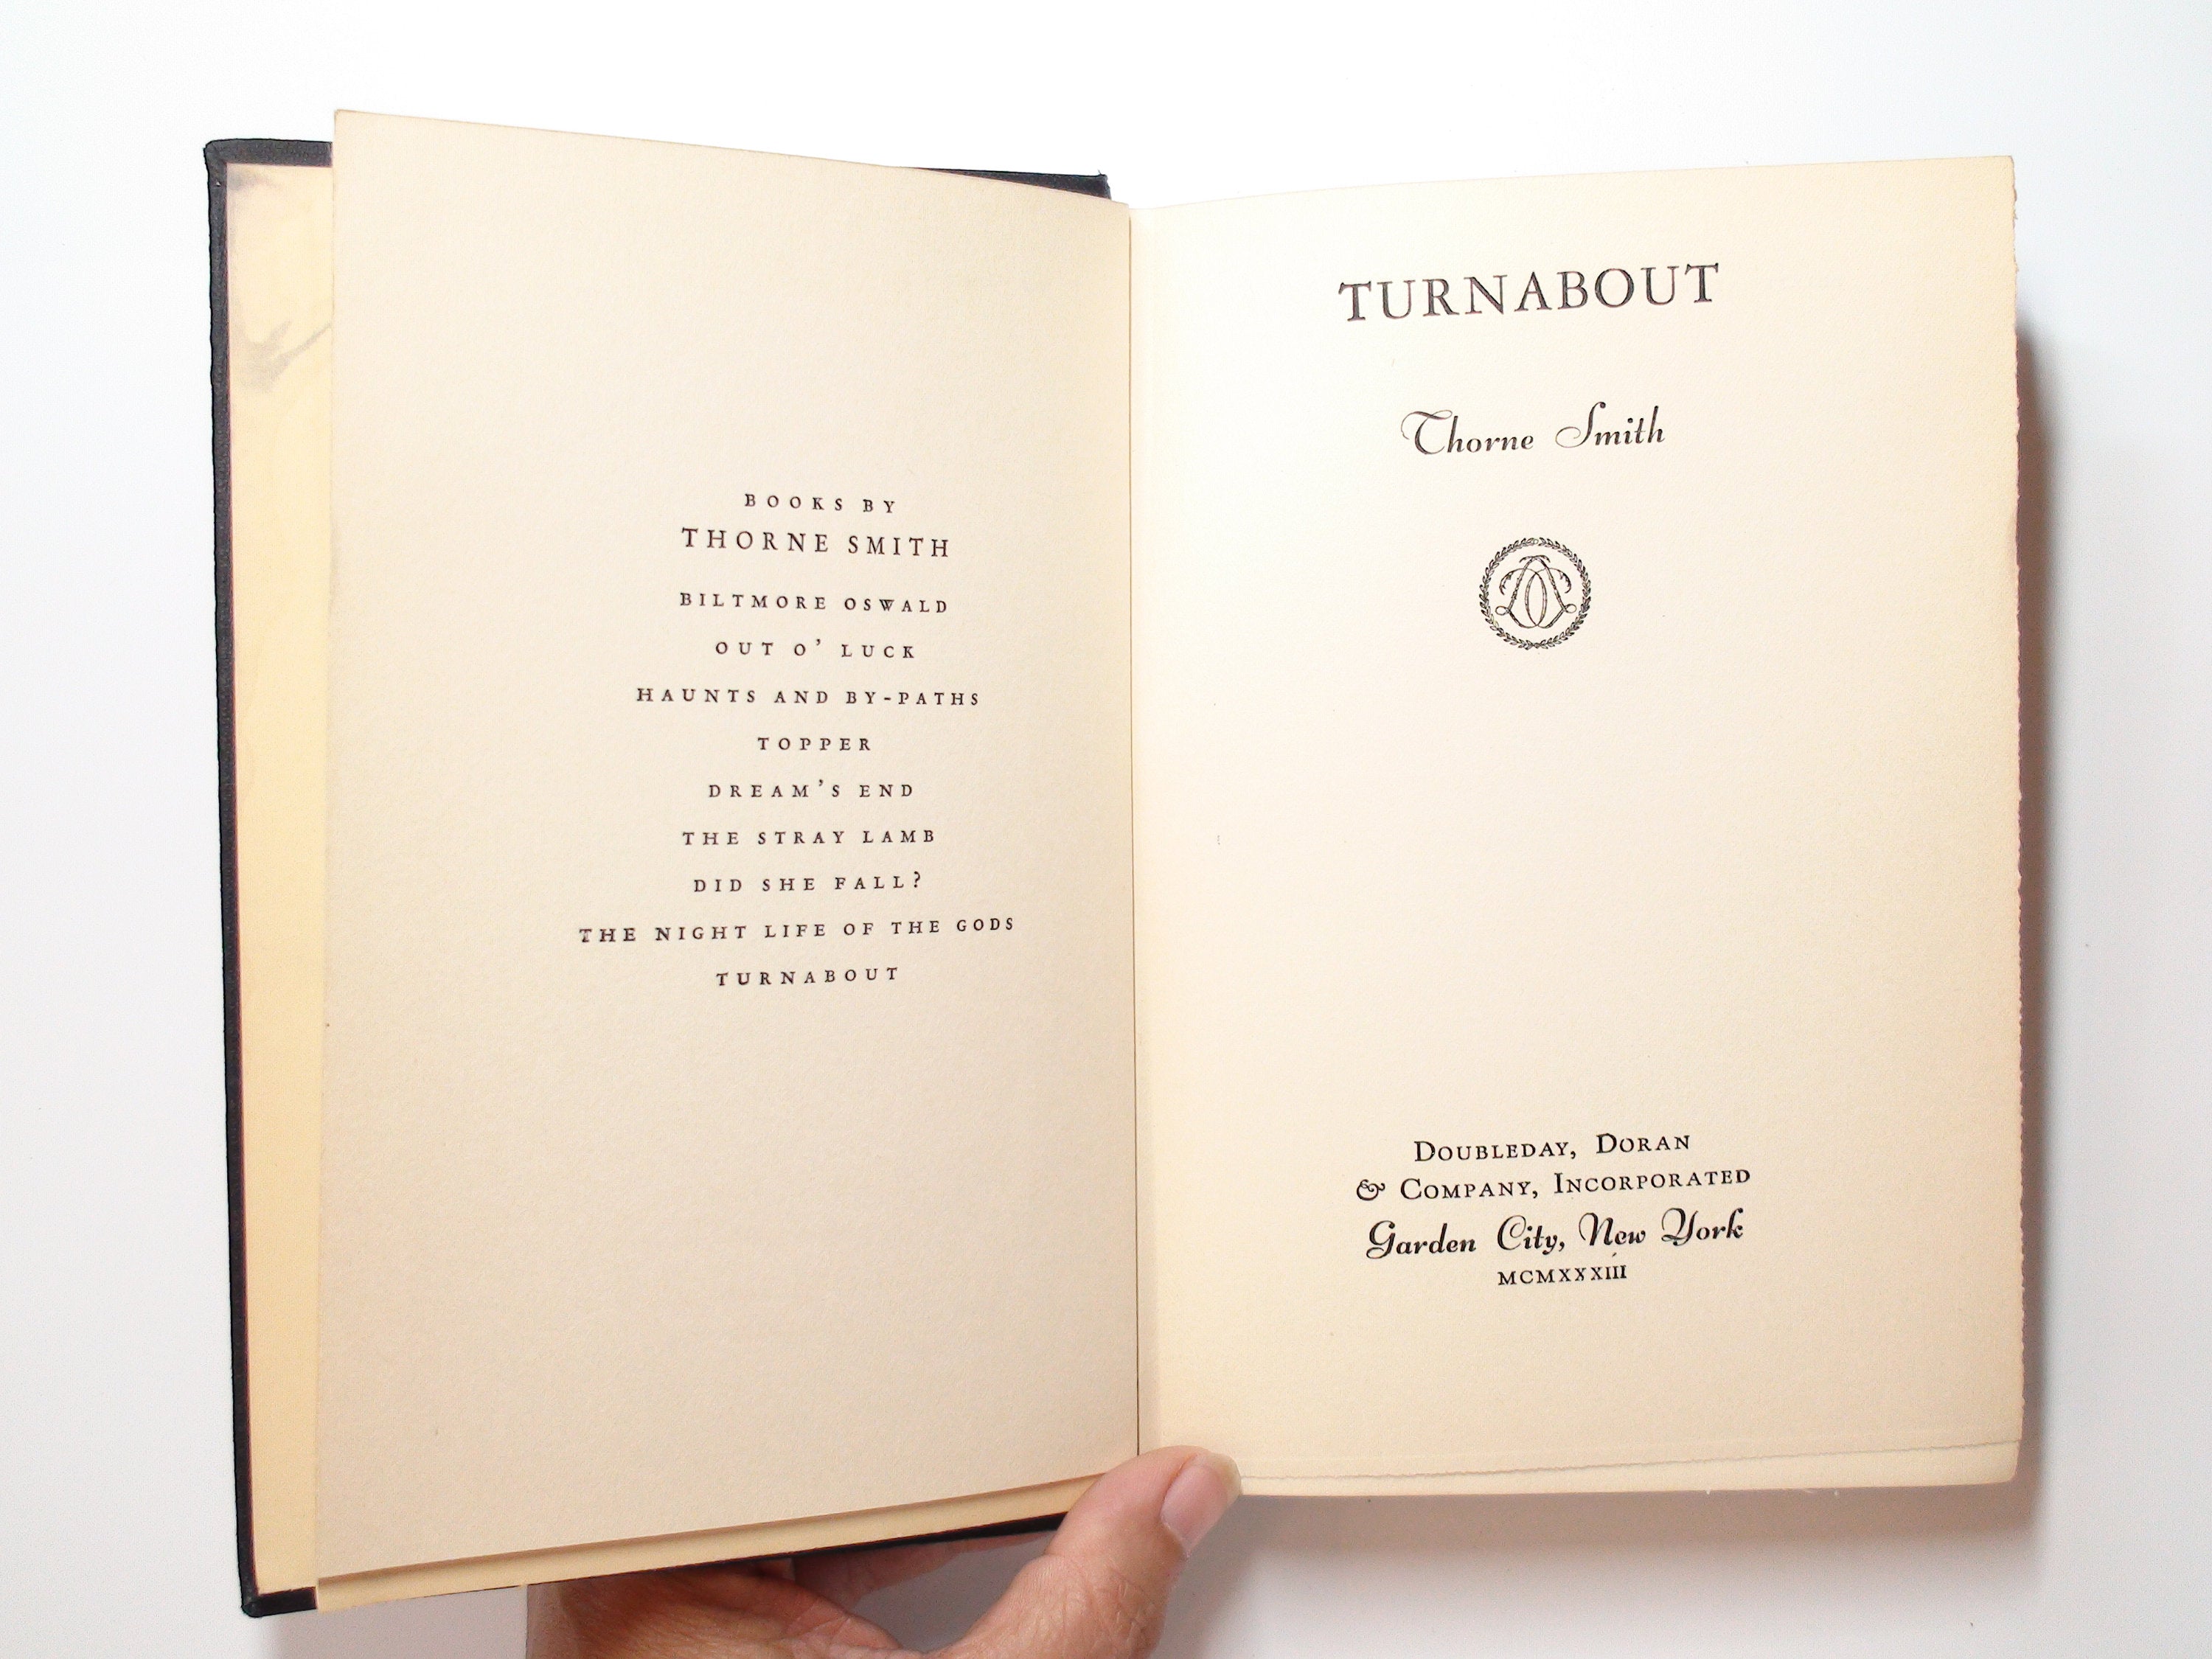 Turnabout, Thorne Smith, Hardcover, No D/J, 1933